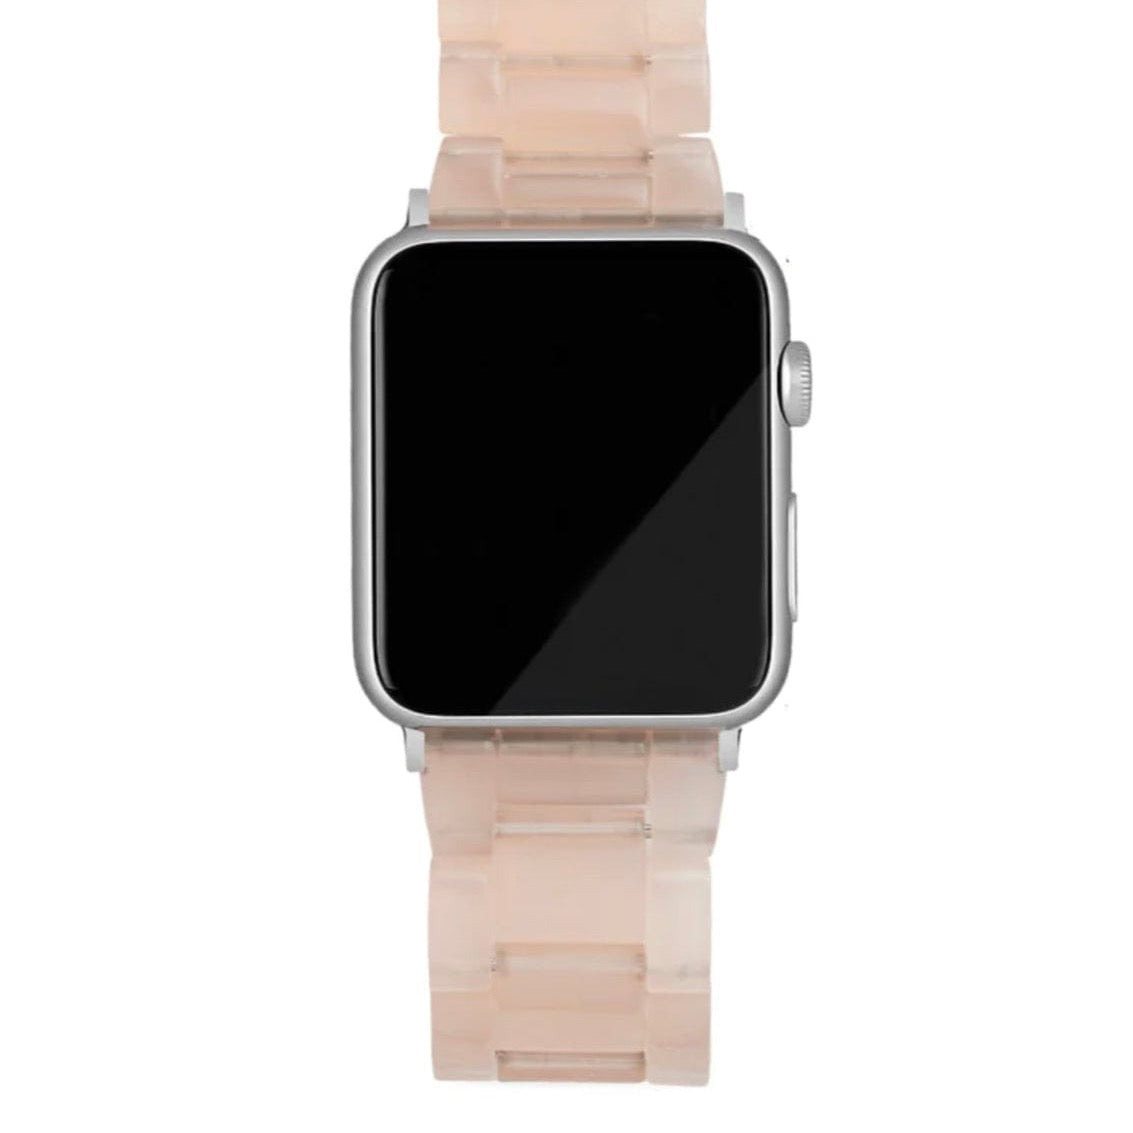 Universal Apple Watch Band/ DELUXE Edition Light Rose with Silver Hardwear by Machete